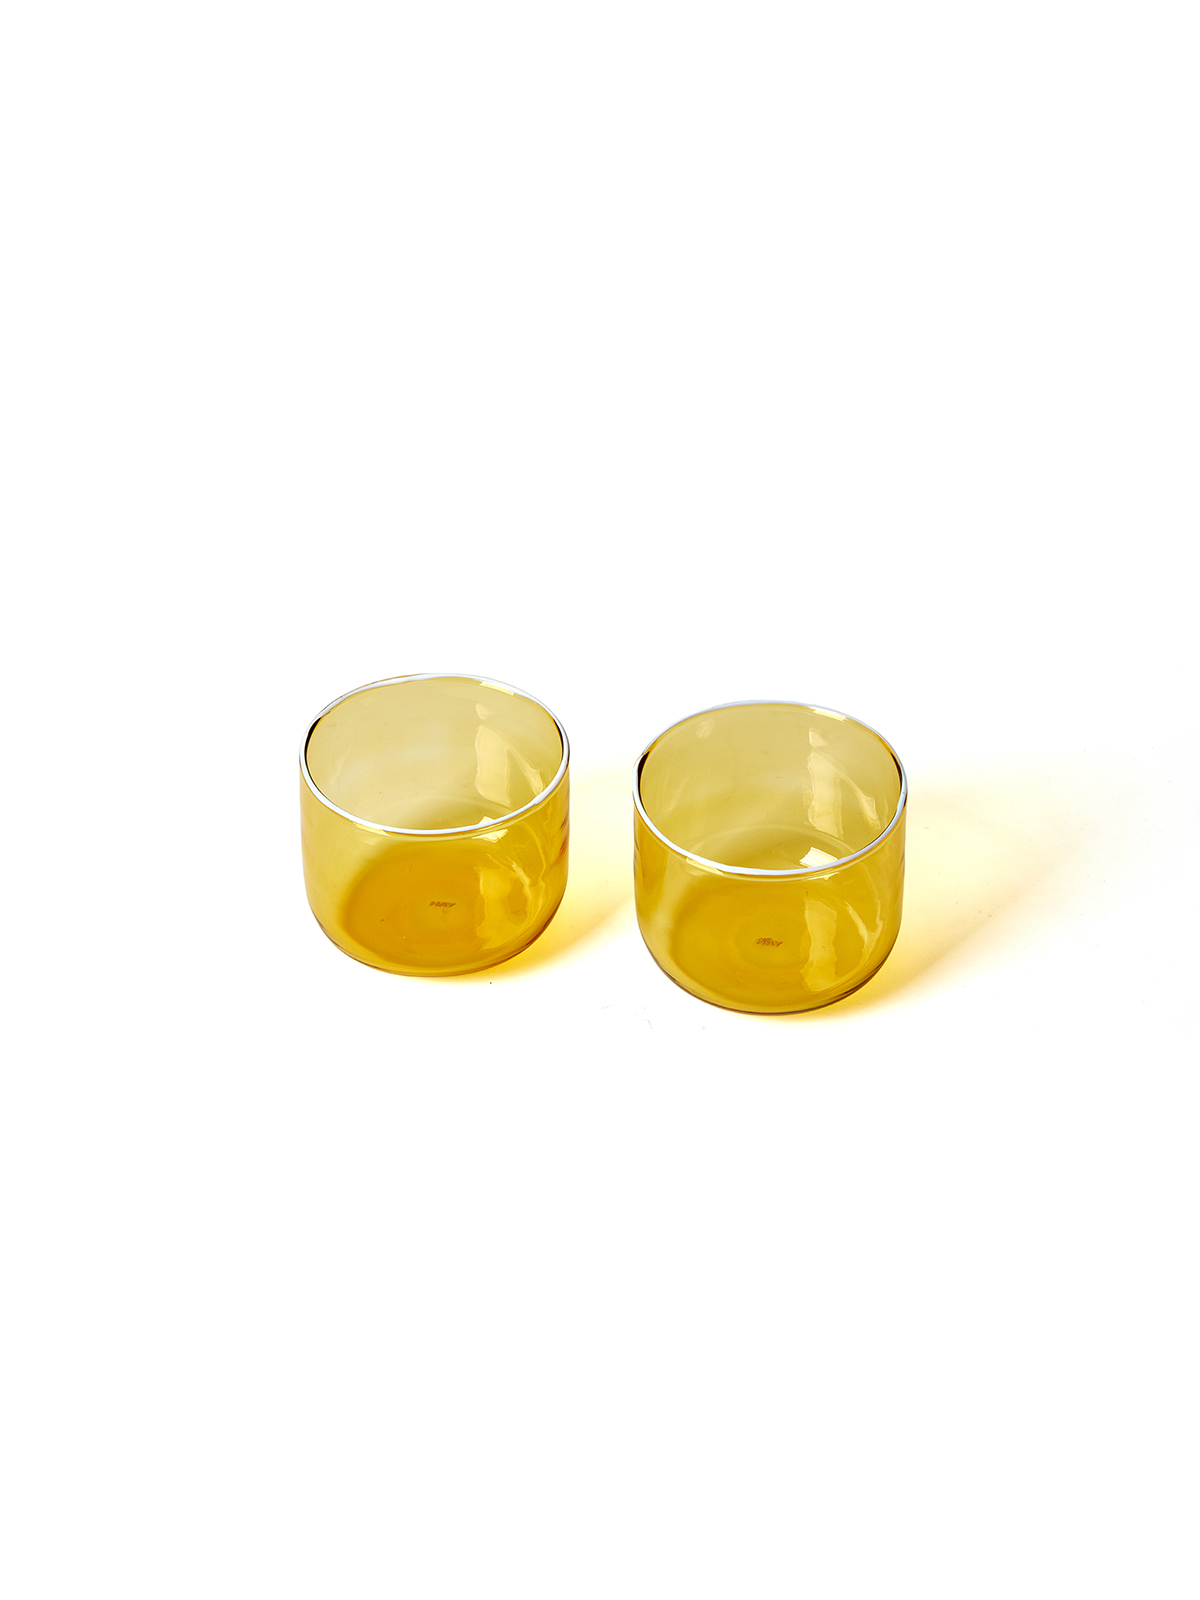 TINT GLASS SET OF 2 (LIGHT YELLOW WITH WHITE RIM)